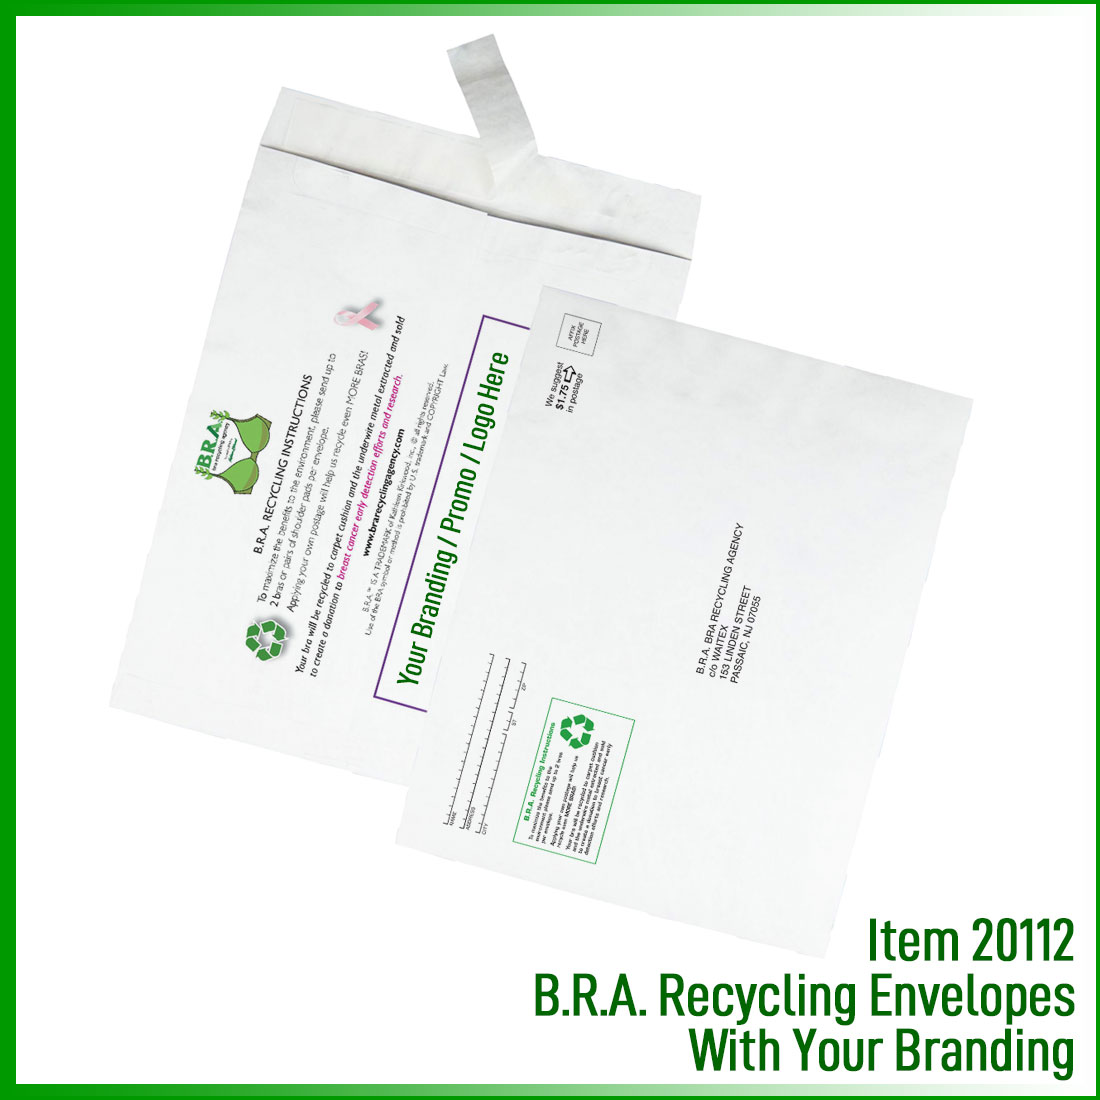 B.R.A. Recycling Envelopes (With Your Branding)